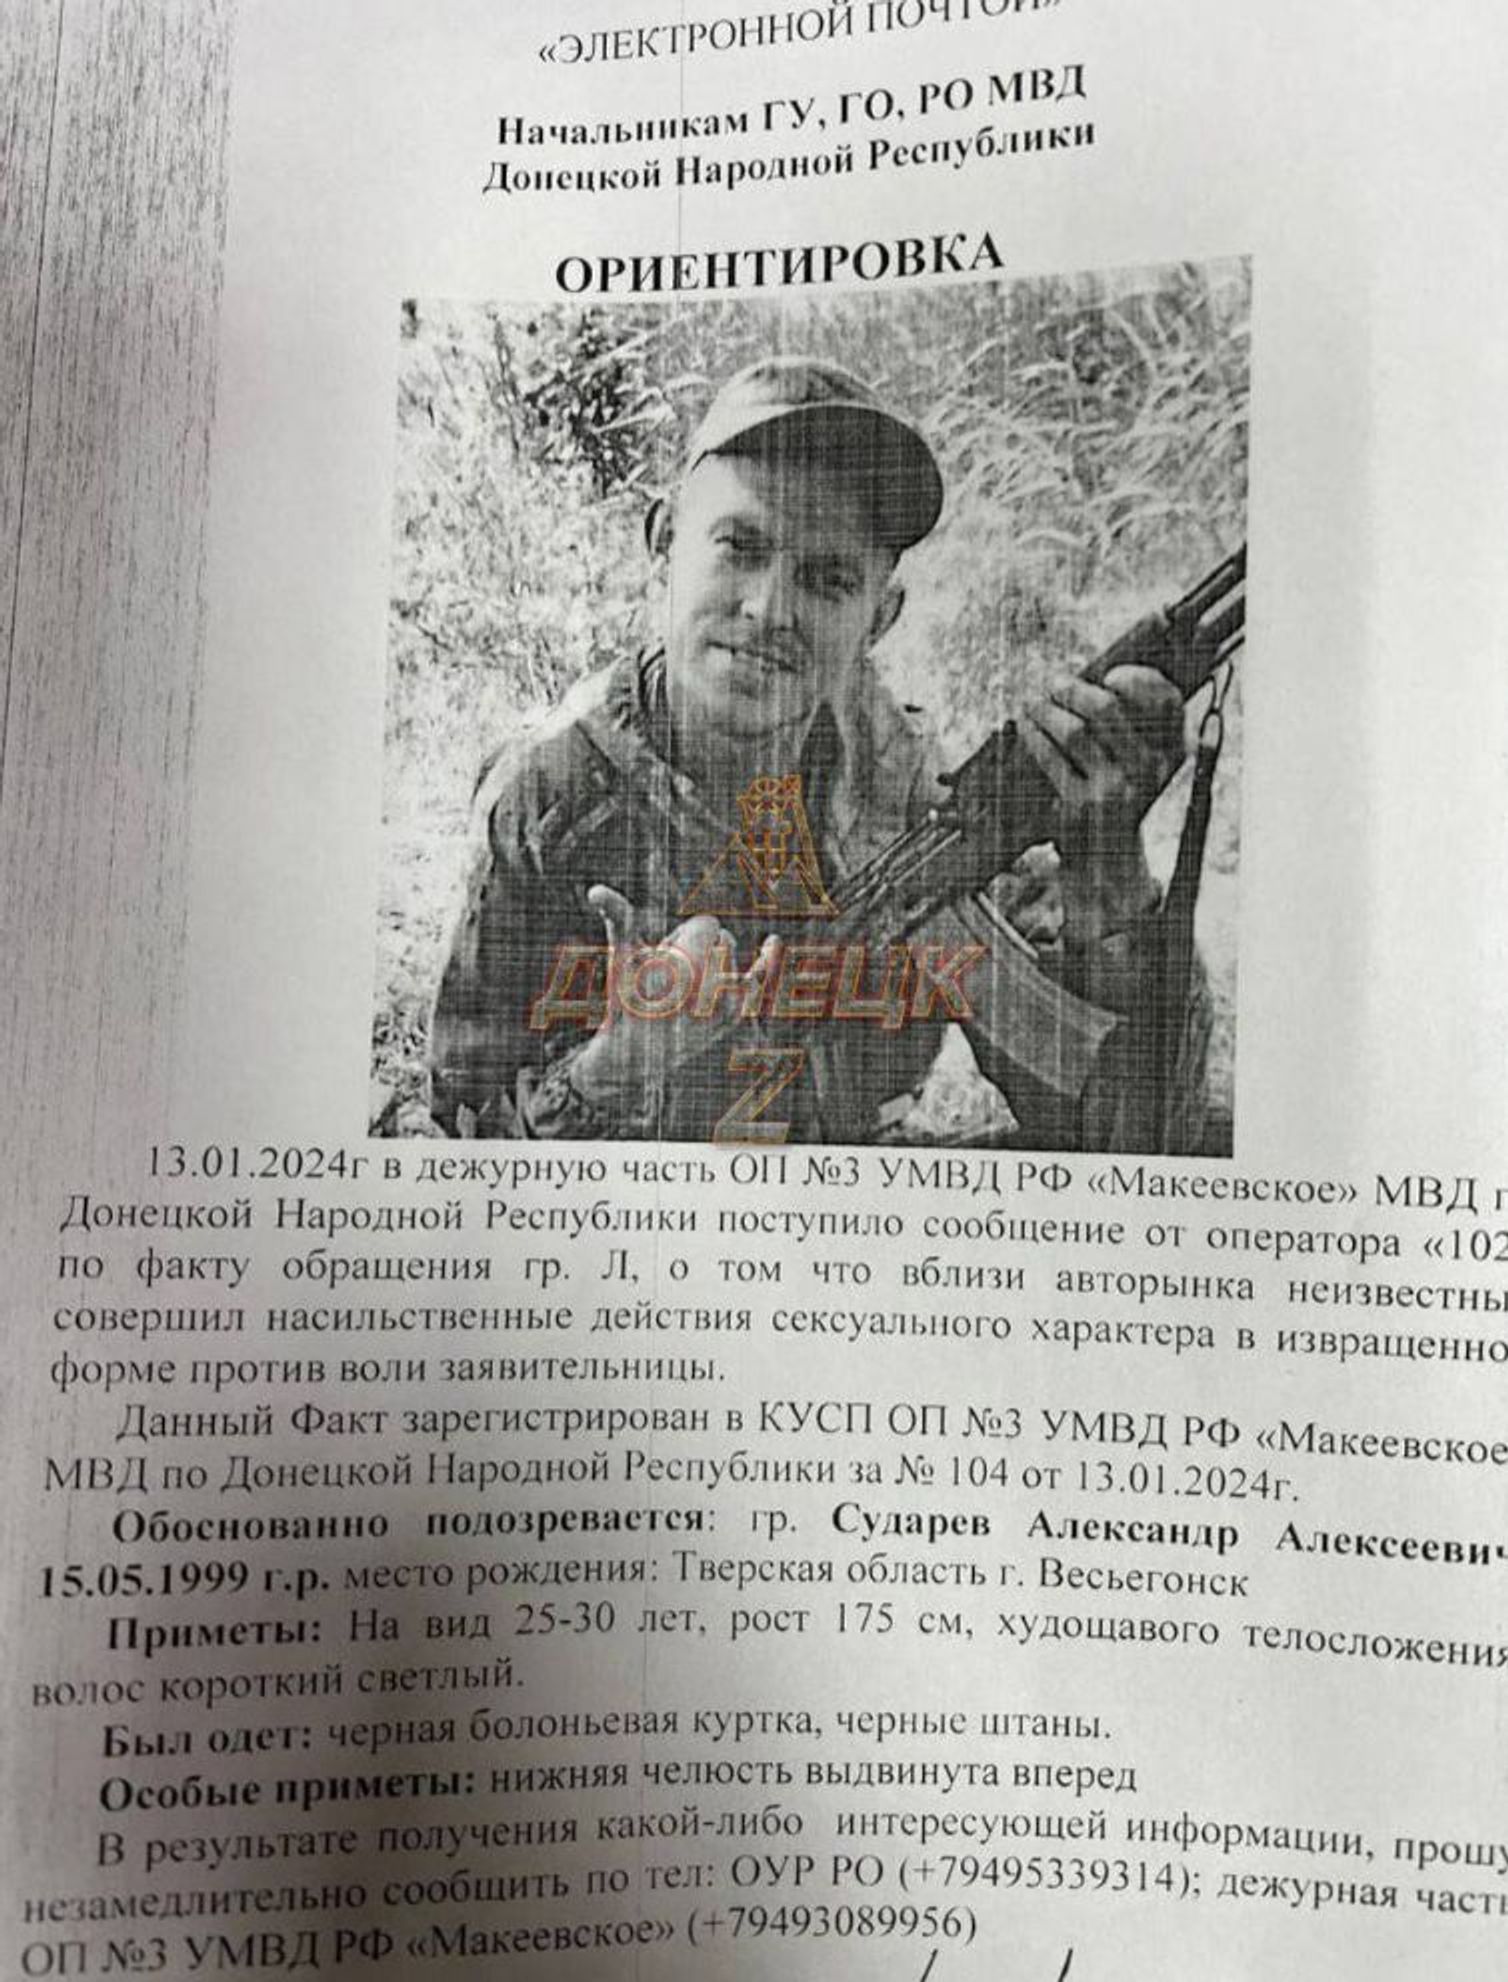 An APB on one of the Russian soldiers distributed in the Donbas; the “authorities” are looking to detain the man on suspicion of sexually assaulting a woman